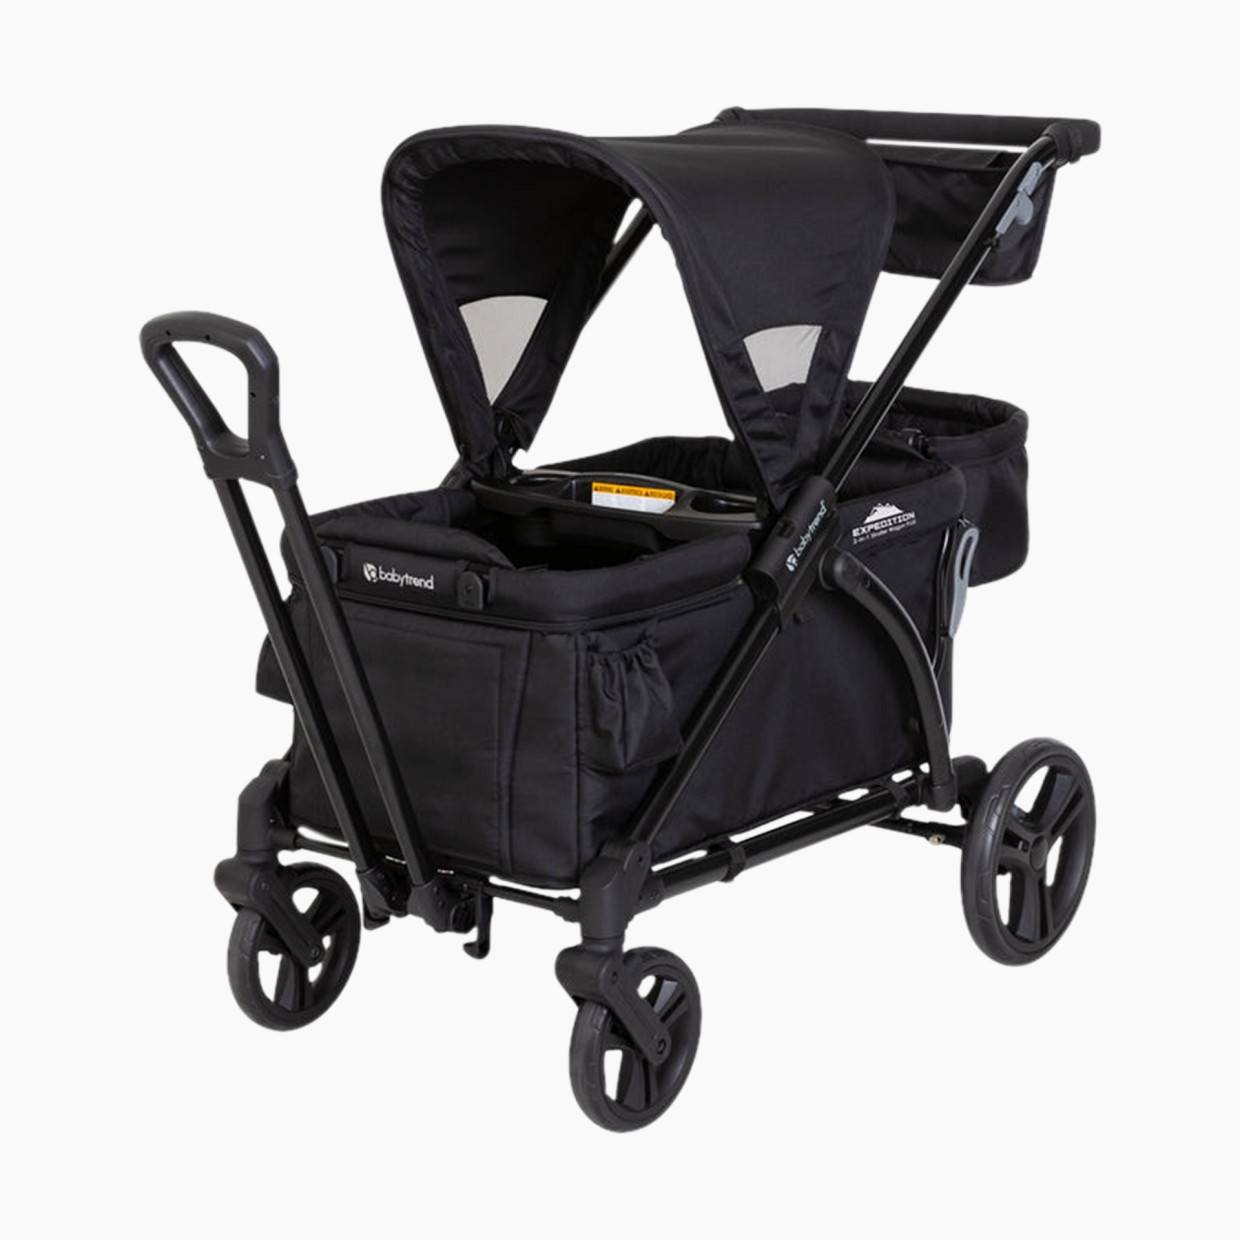 Baby Trend Expedition 2-in-1 Stroller Wagon PLUS - Ultra Black.